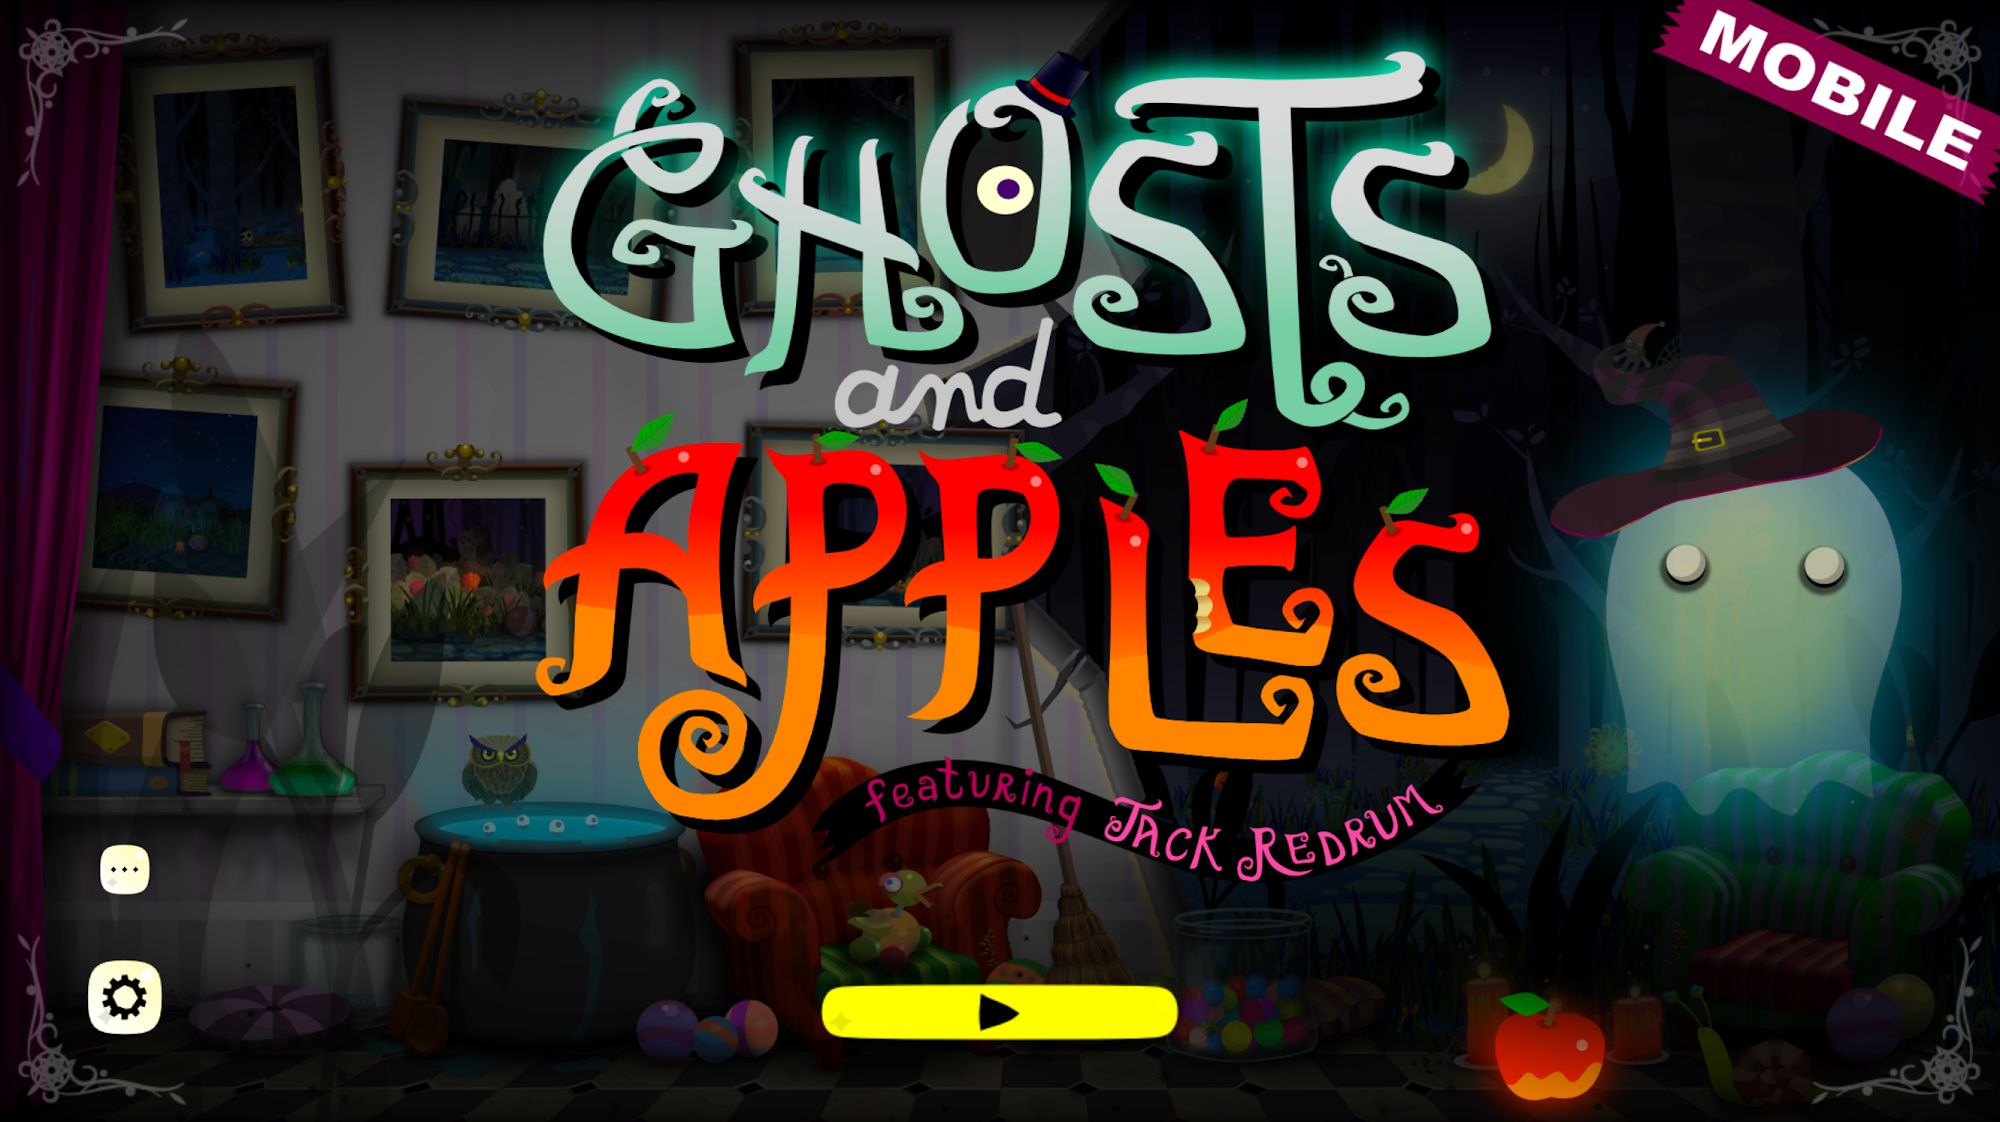 Full version of Android Arcade game apk Ghosts and Apples Mobile for tablet and phone.